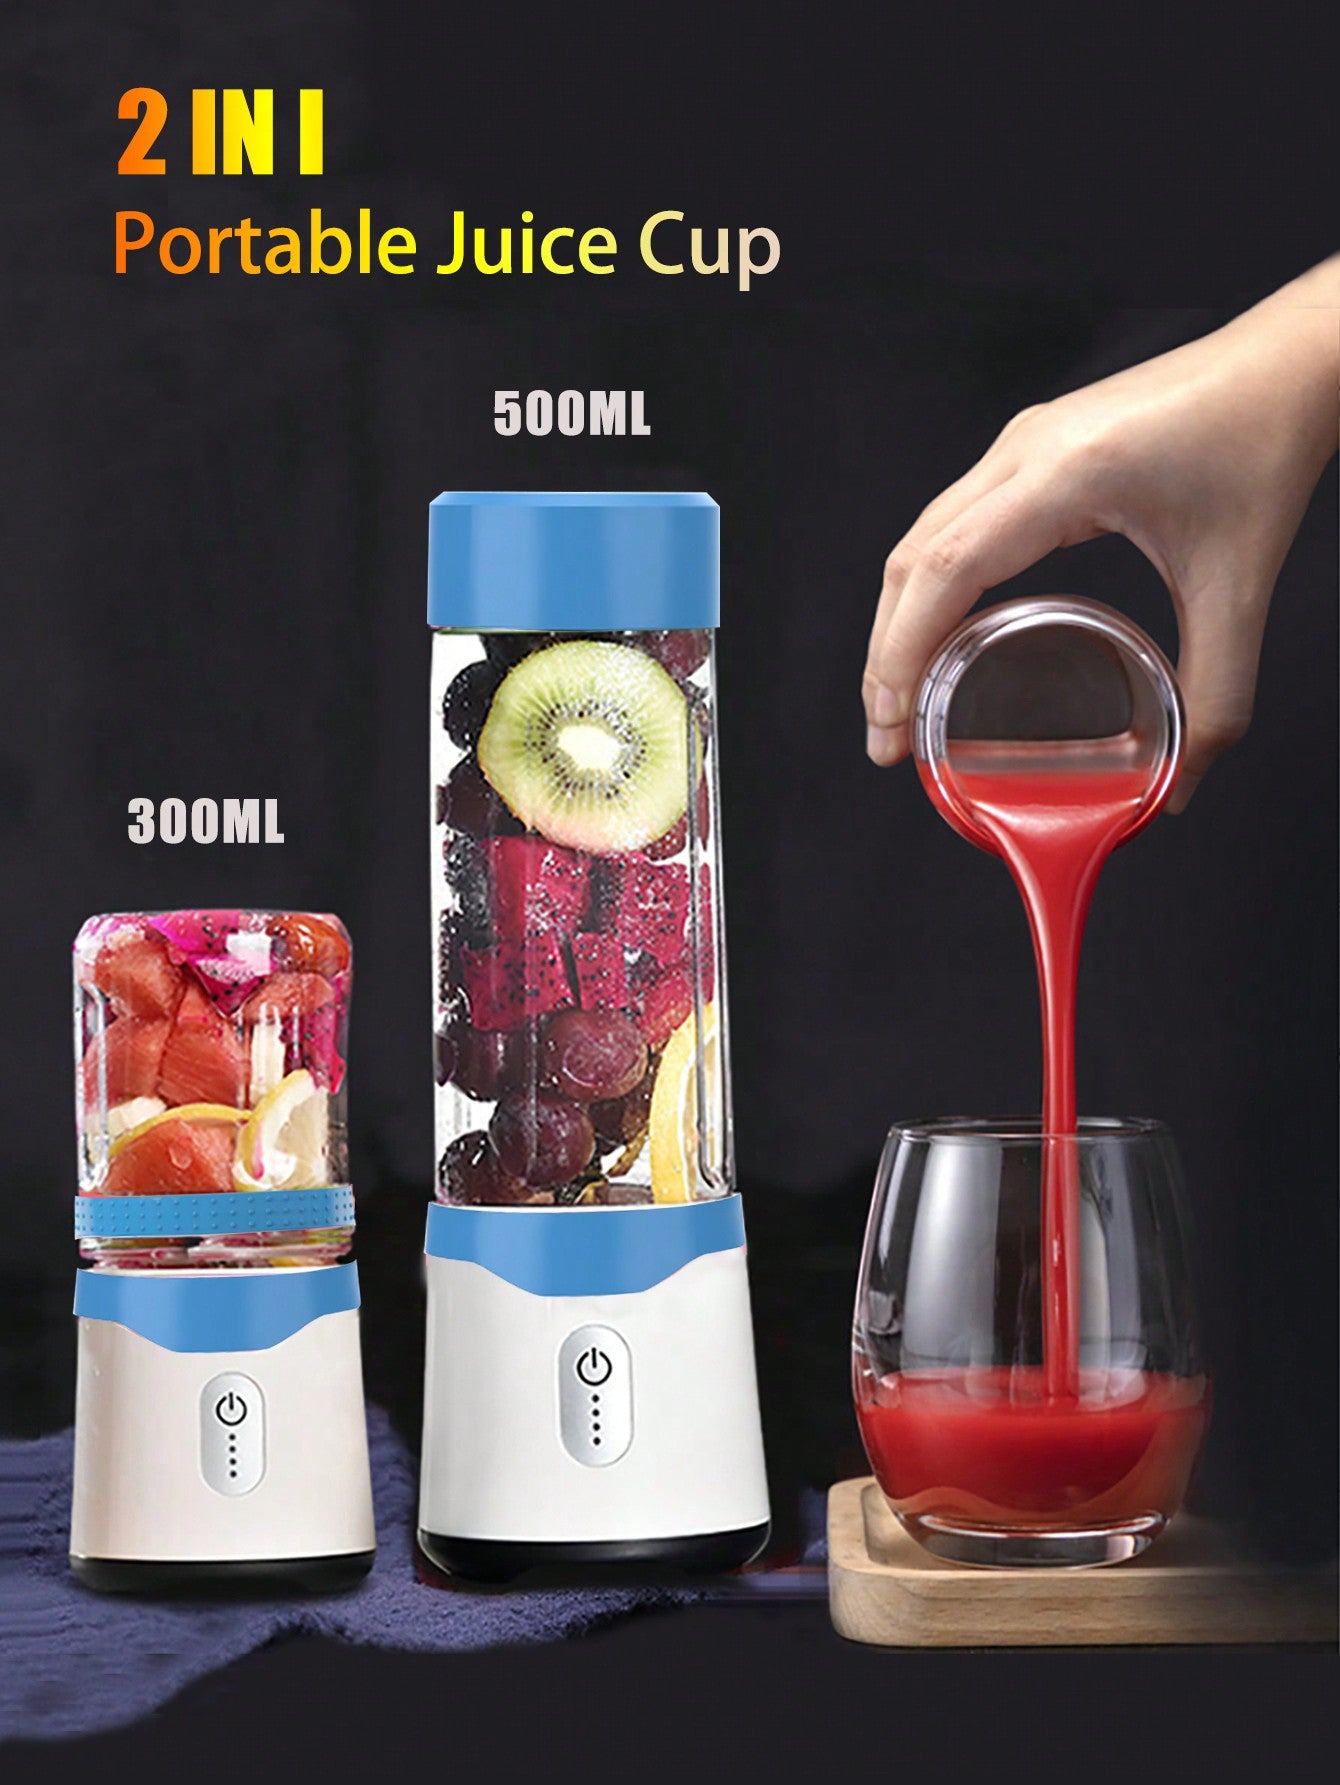 2 in1 Fruit Juice Cup 300ML and 500ML, Automatic Vegetable Blender, Mini Plastic Juicer Cup Machine, Portable Usb Rechargeable Juicer-Teal Blue-1